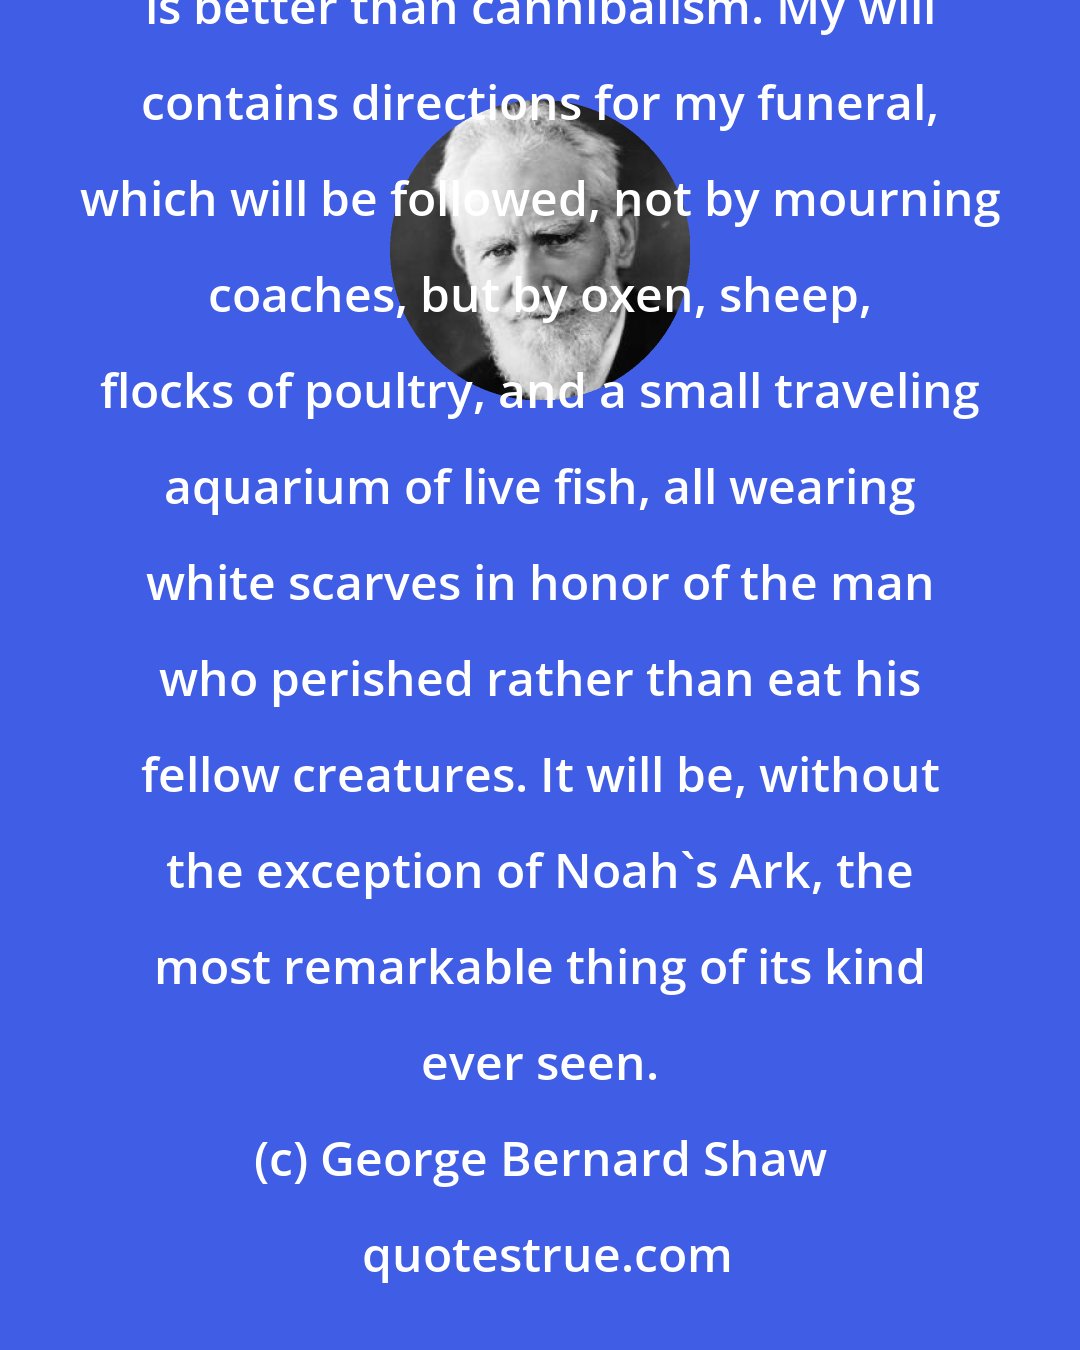 George Bernard Shaw: My situation is a solemn one: life is offered to me on the condition of eating beefsteaks. But death is better than cannibalism. My will contains directions for my funeral, which will be followed, not by mourning coaches, but by oxen, sheep, flocks of poultry, and a small traveling aquarium of live fish, all wearing white scarves in honor of the man who perished rather than eat his fellow creatures. It will be, without the exception of Noah's Ark, the most remarkable thing of its kind ever seen.